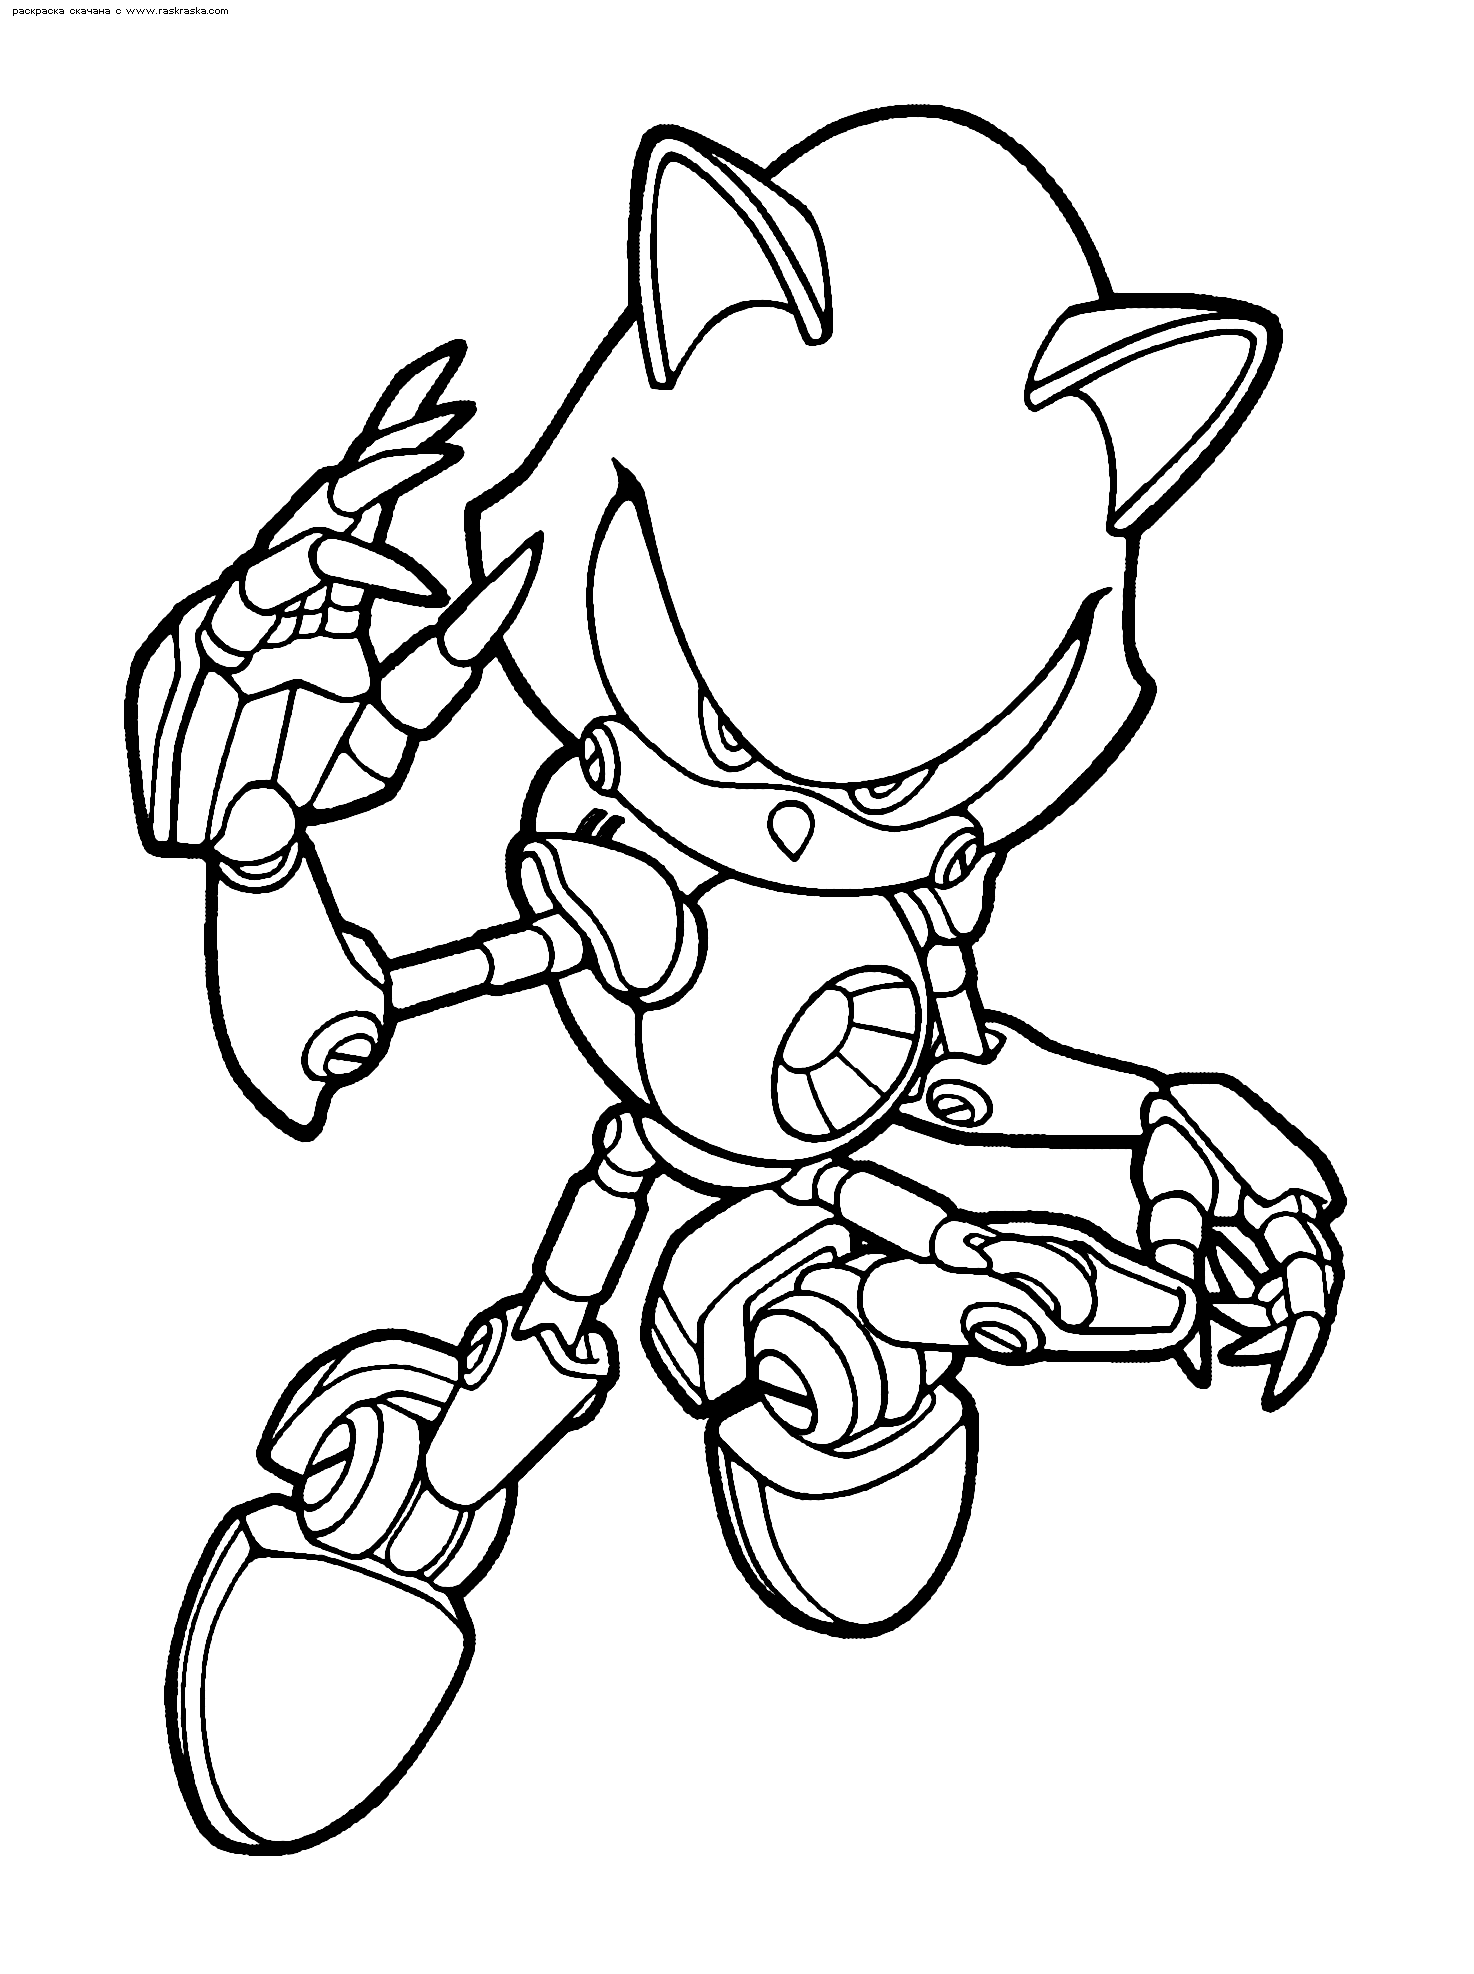 Sonic coloring pages | disney coloring pages for kids | color pages | coloring pages to print | kids coloring pages | #109